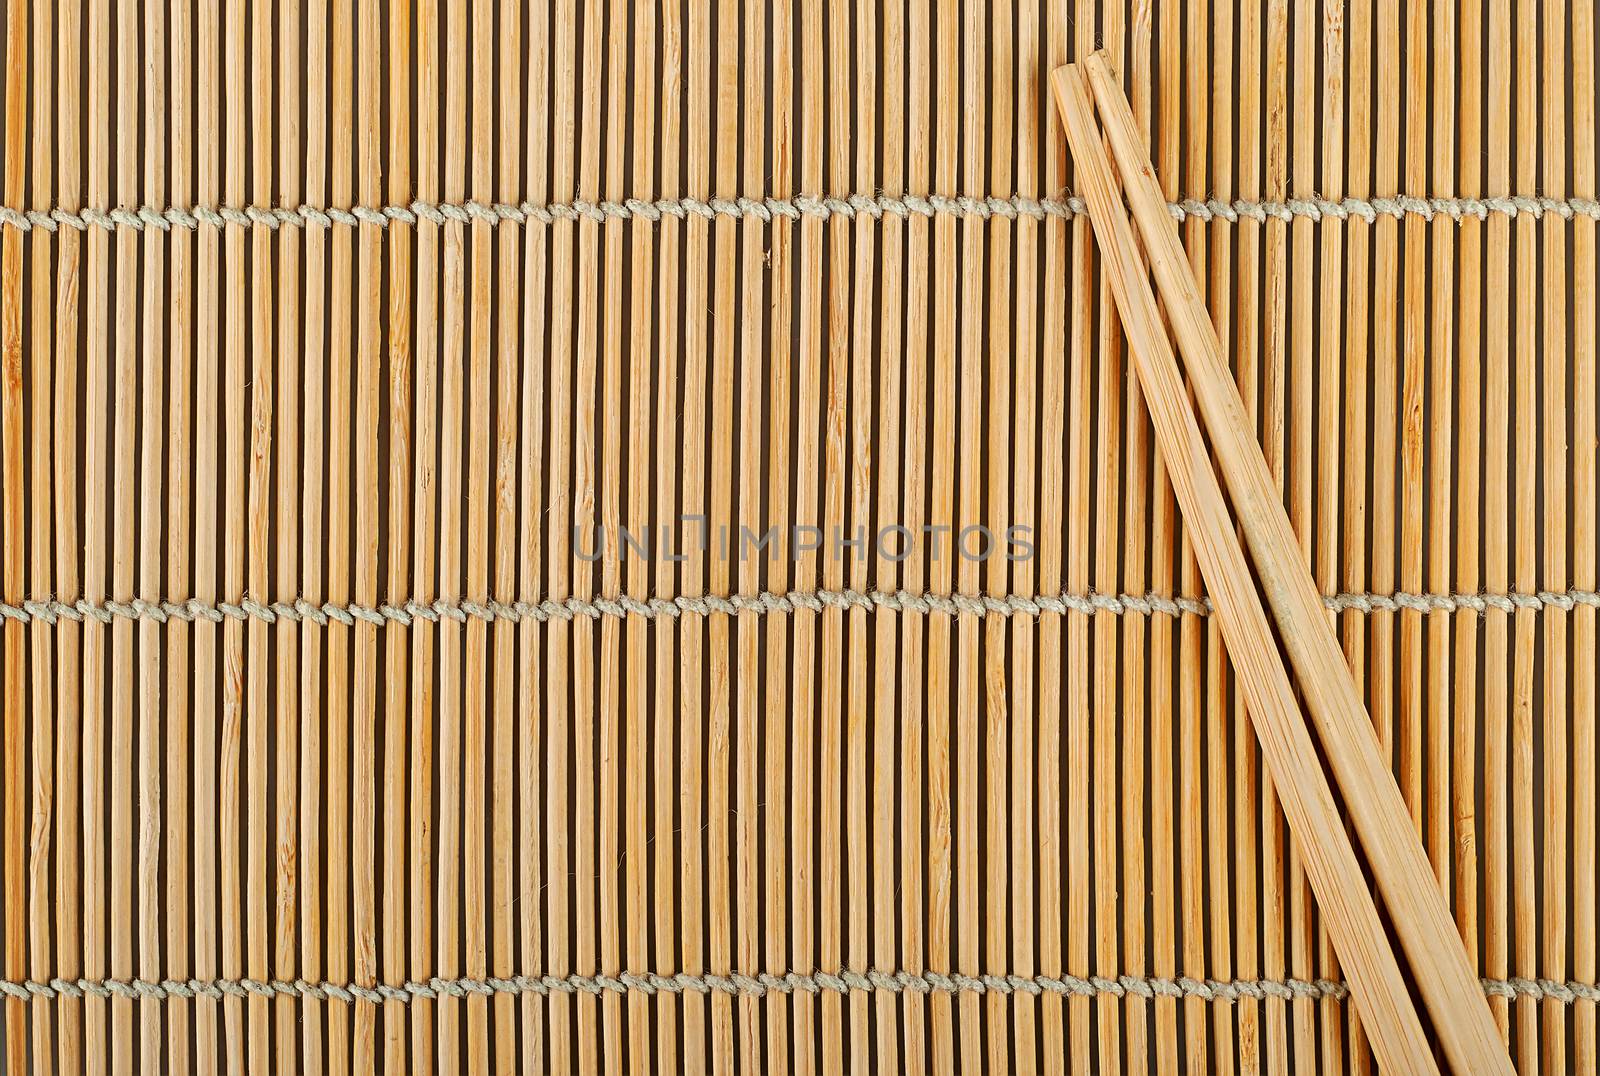 Bamboo sushi mat and chopsticks on top by Cipariss